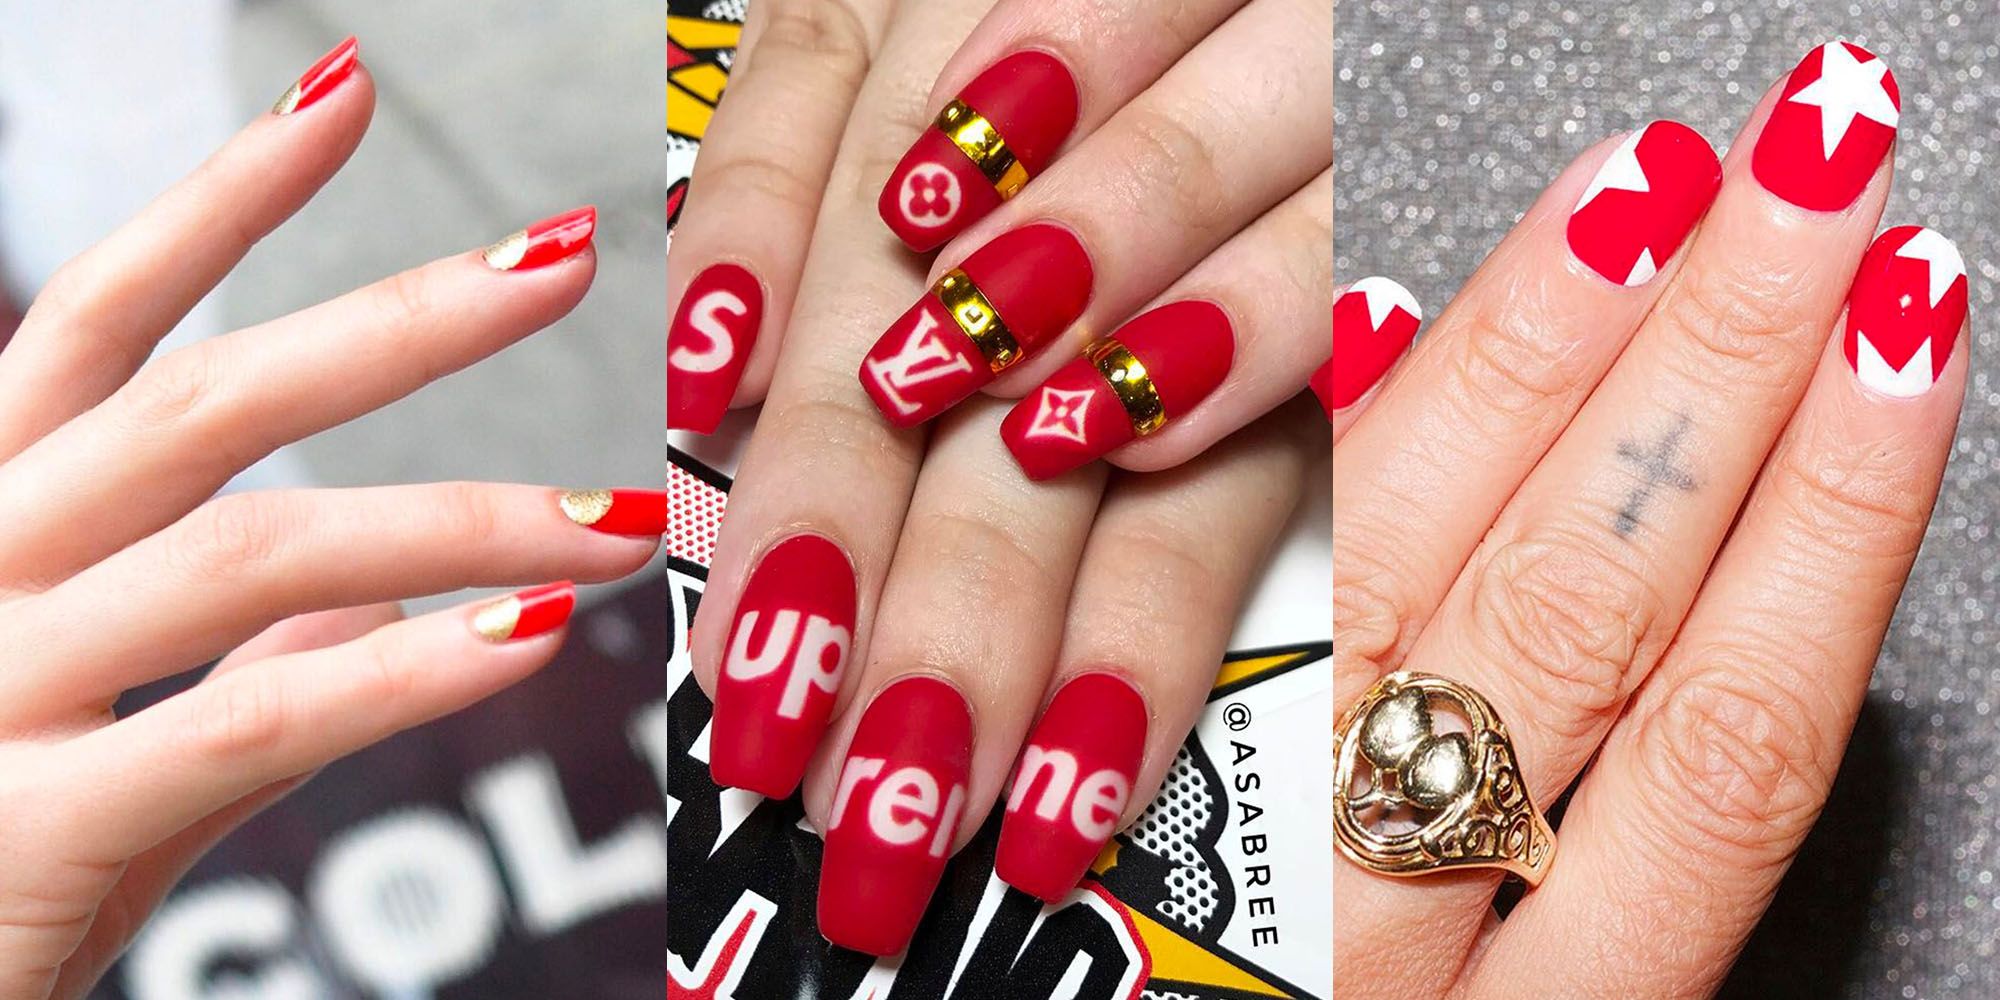 10 super cute nail art ideas to get now that salons have reopened |  Cosmopolitan Middle East